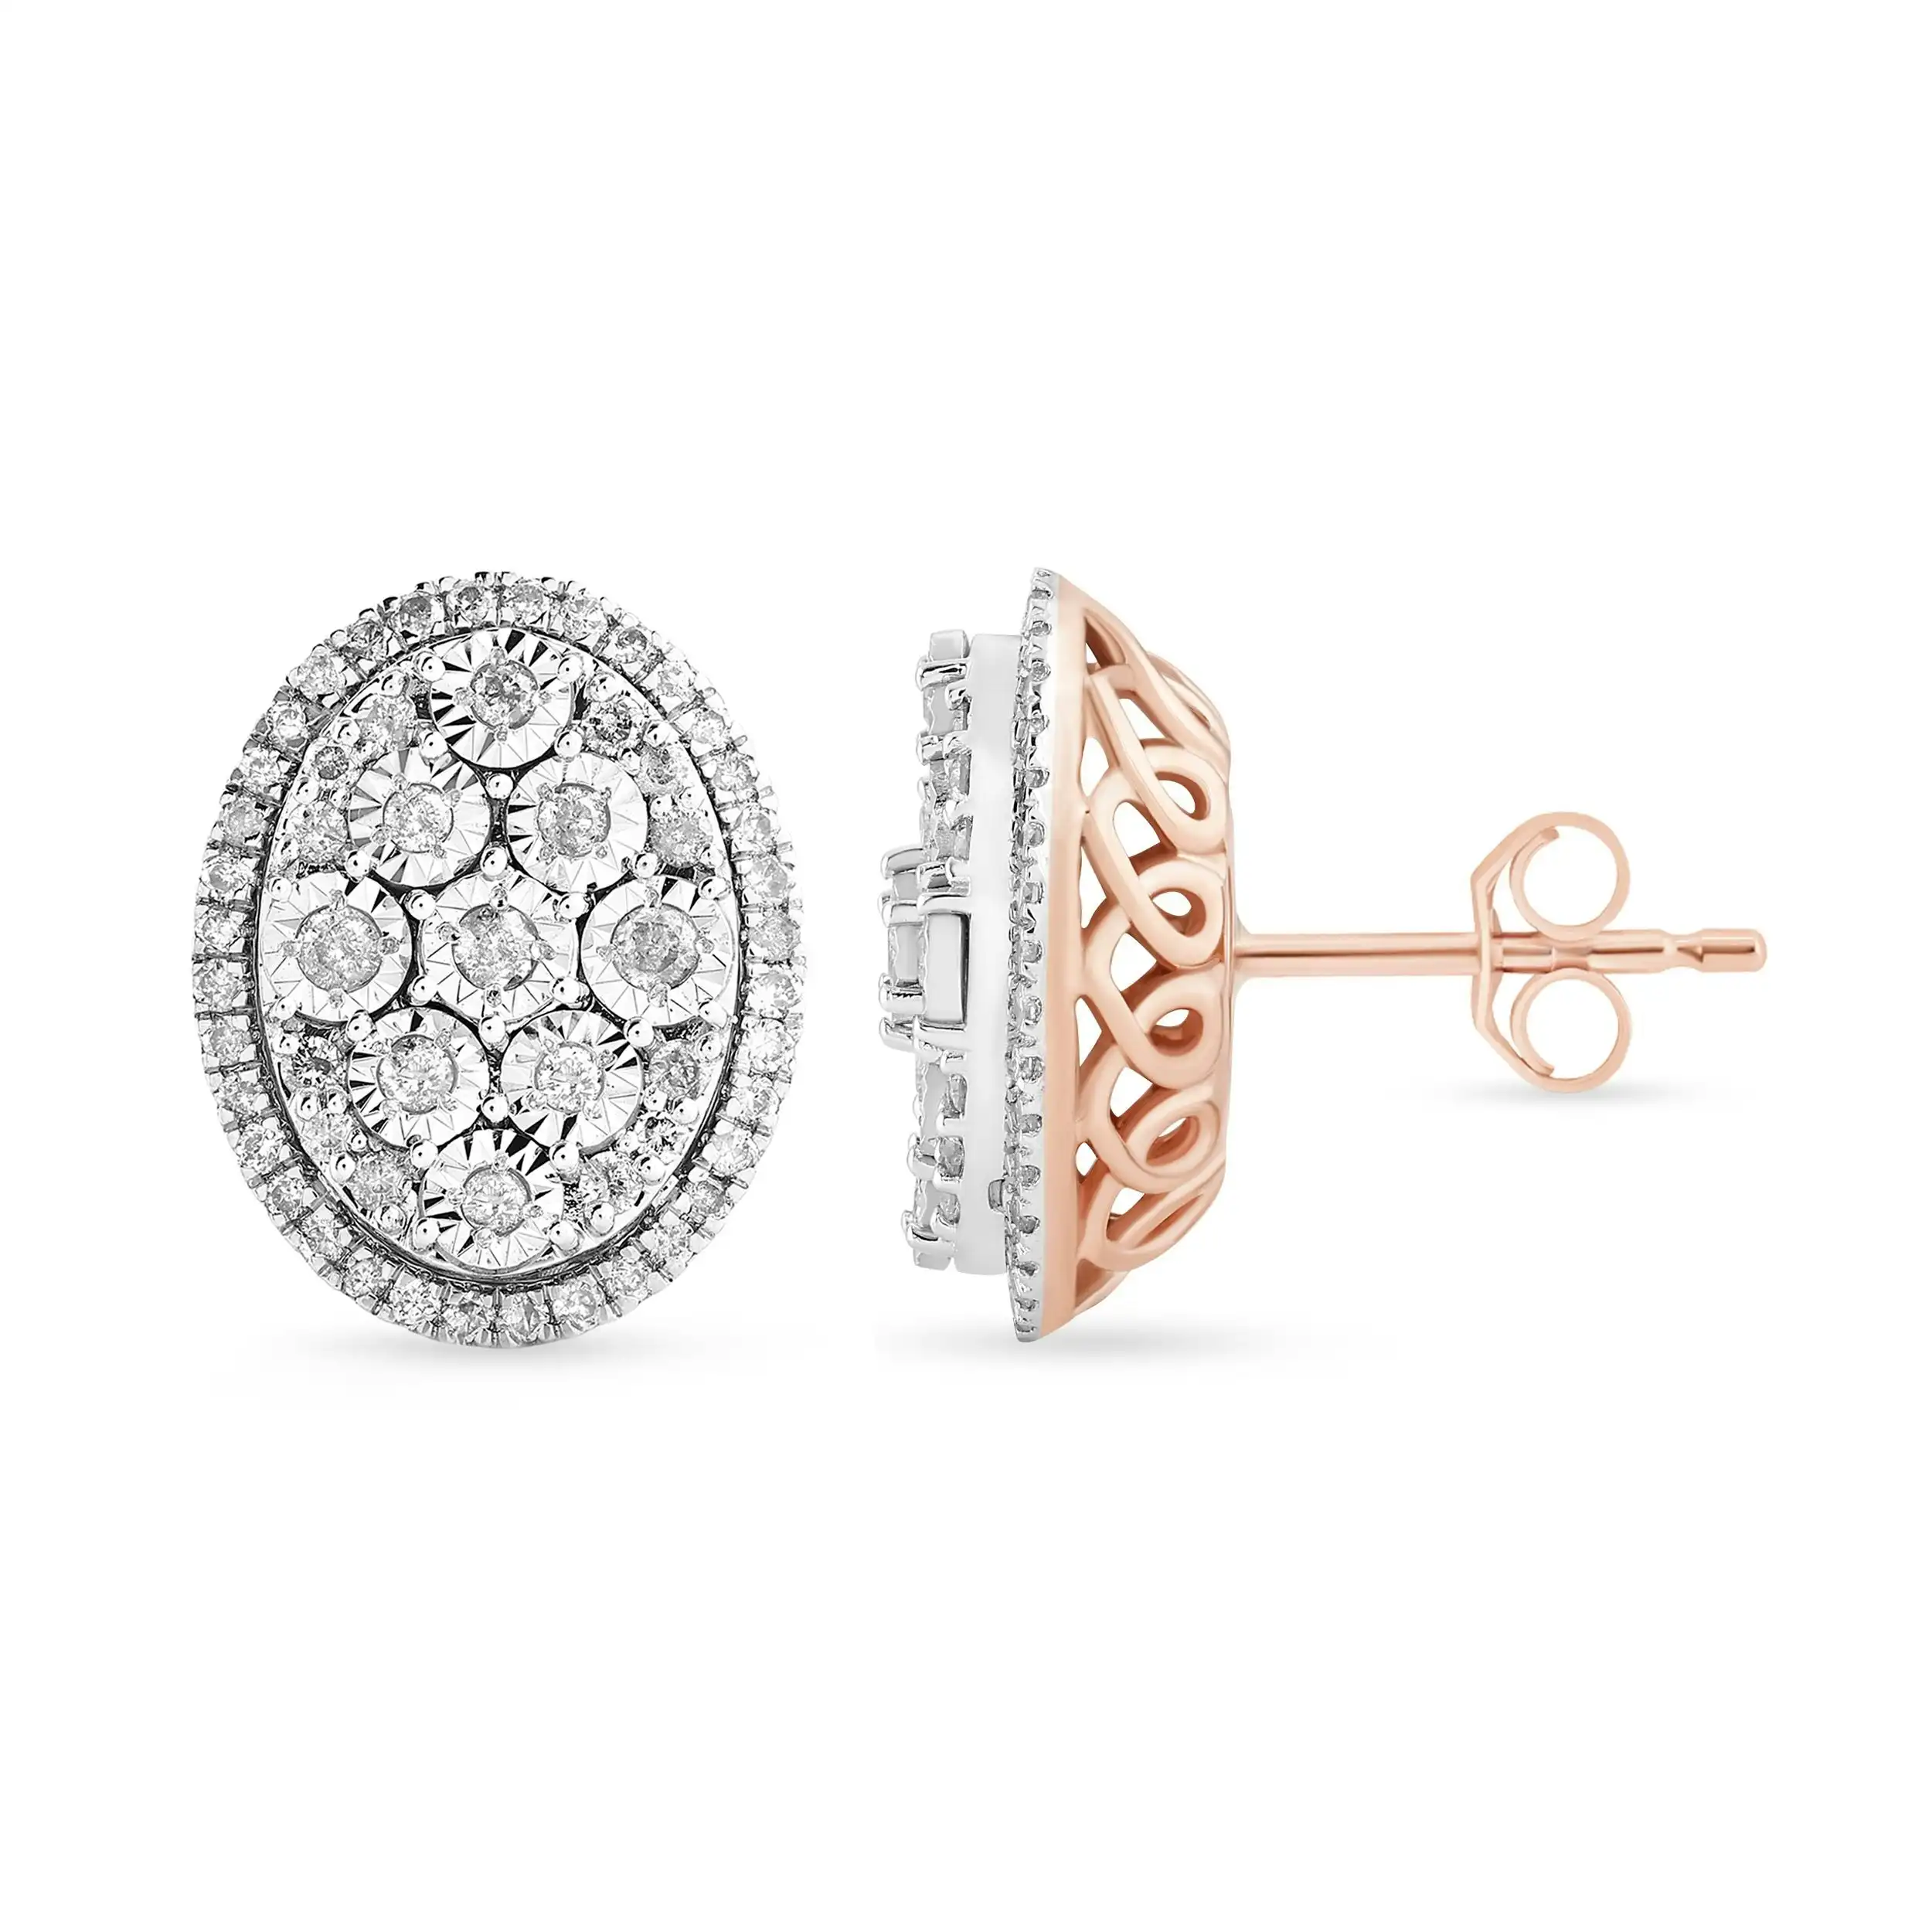 Halo Oval Earrings with 1/2ct of Diamonds in 9ct Rose Gold